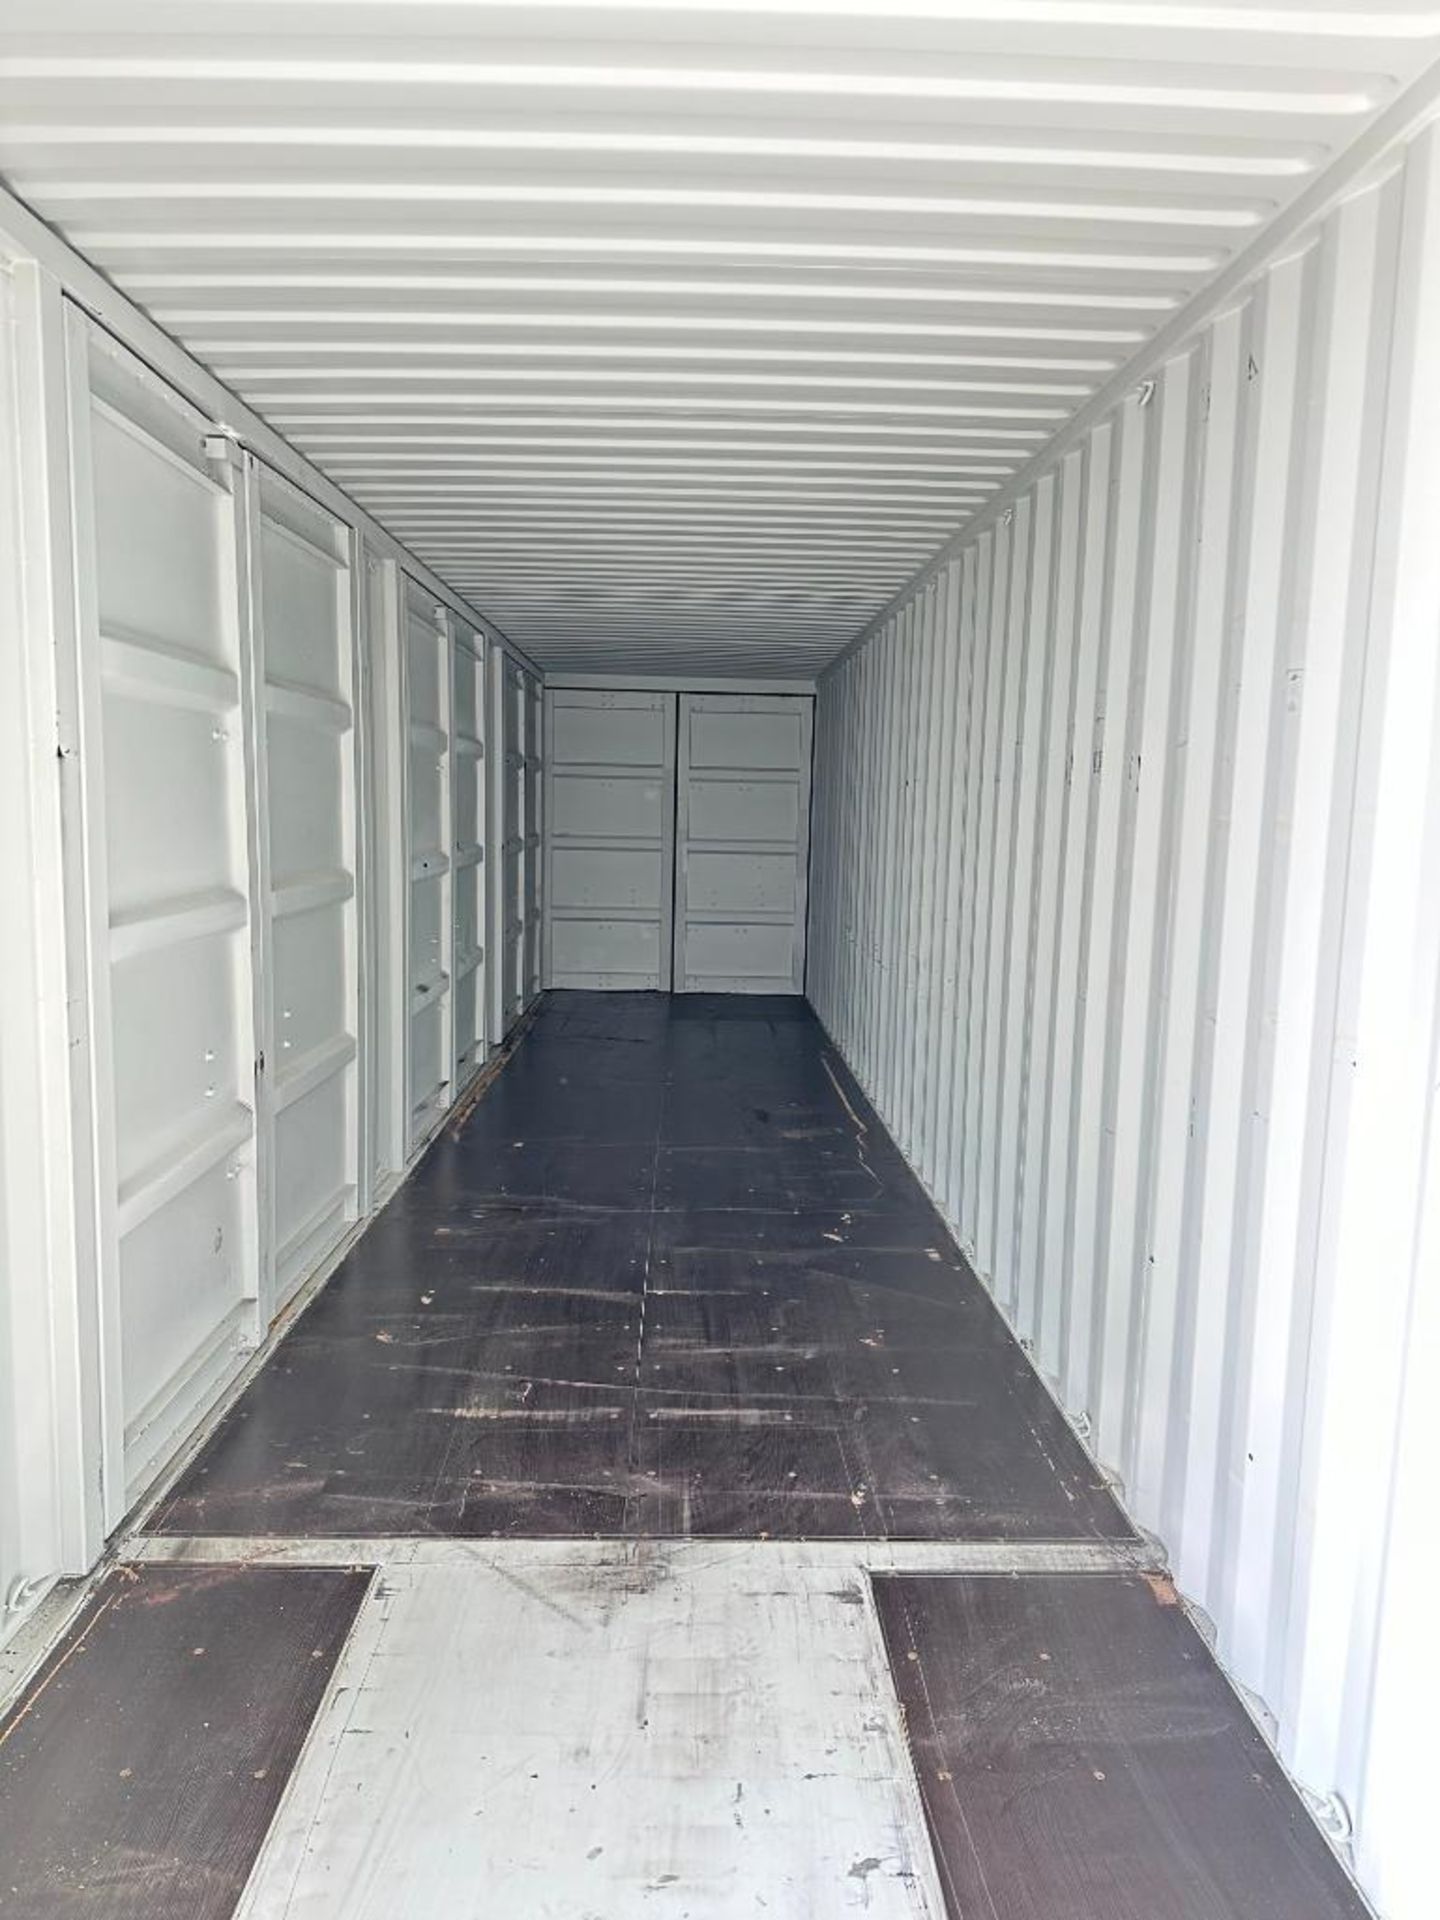 2022 40FT MULTI-DOOR SHIPPING CONTAINER BRAND/MODEL: LYGU 45G3 INFORMATION: NEW,2022 STORAGE CONTAI - Image 11 of 23